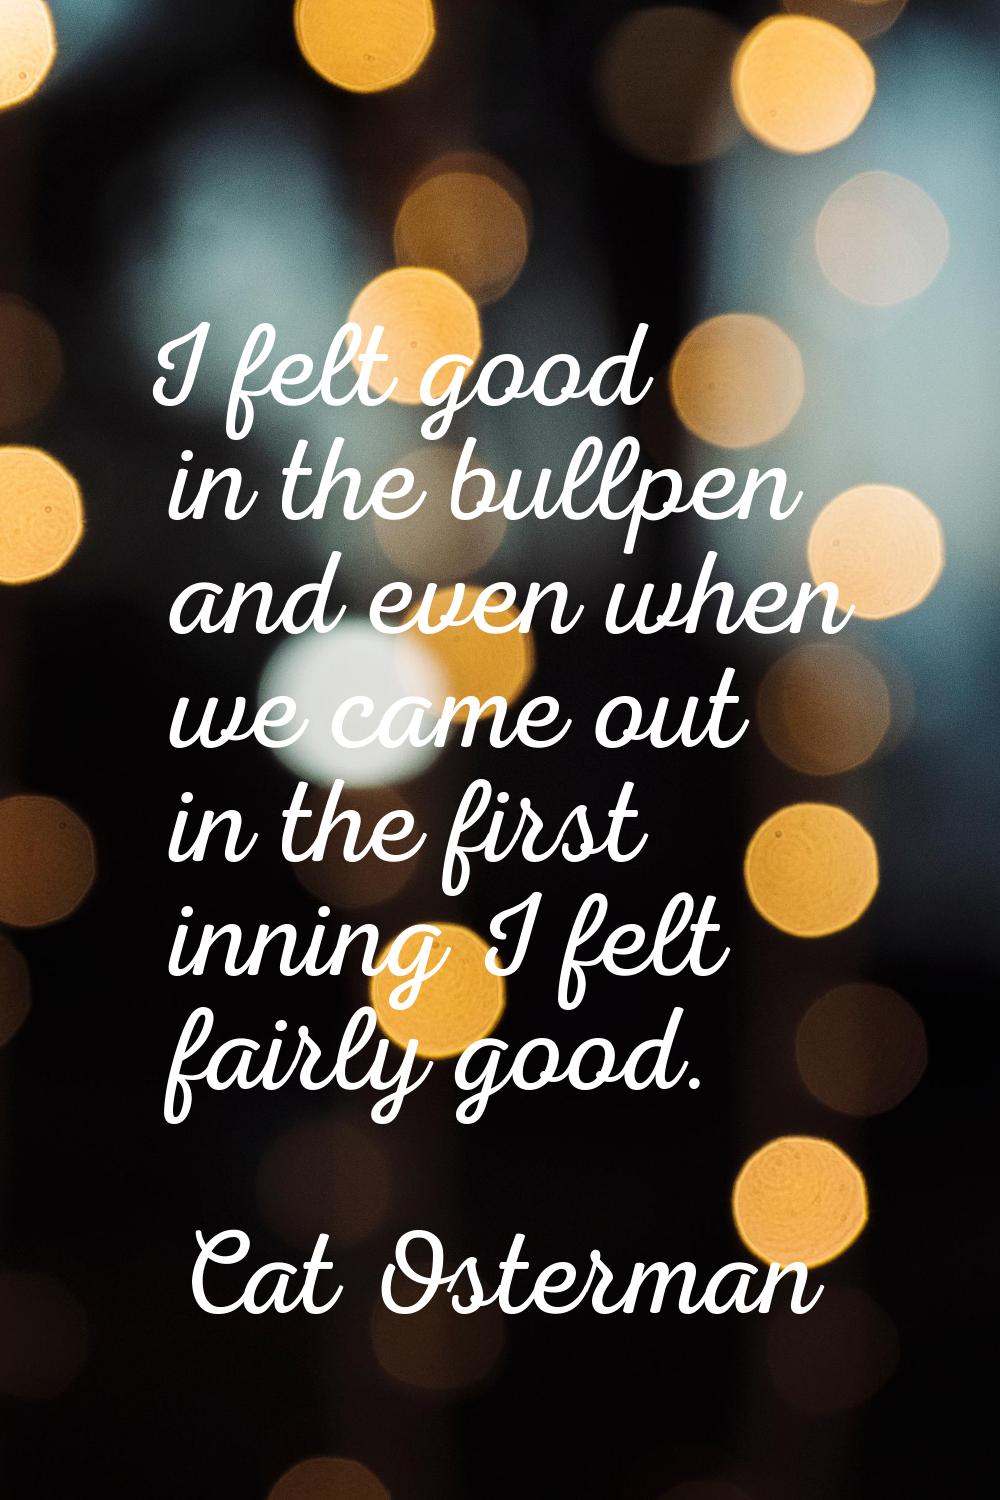 I felt good in the bullpen and even when we came out in the first inning I felt fairly good.